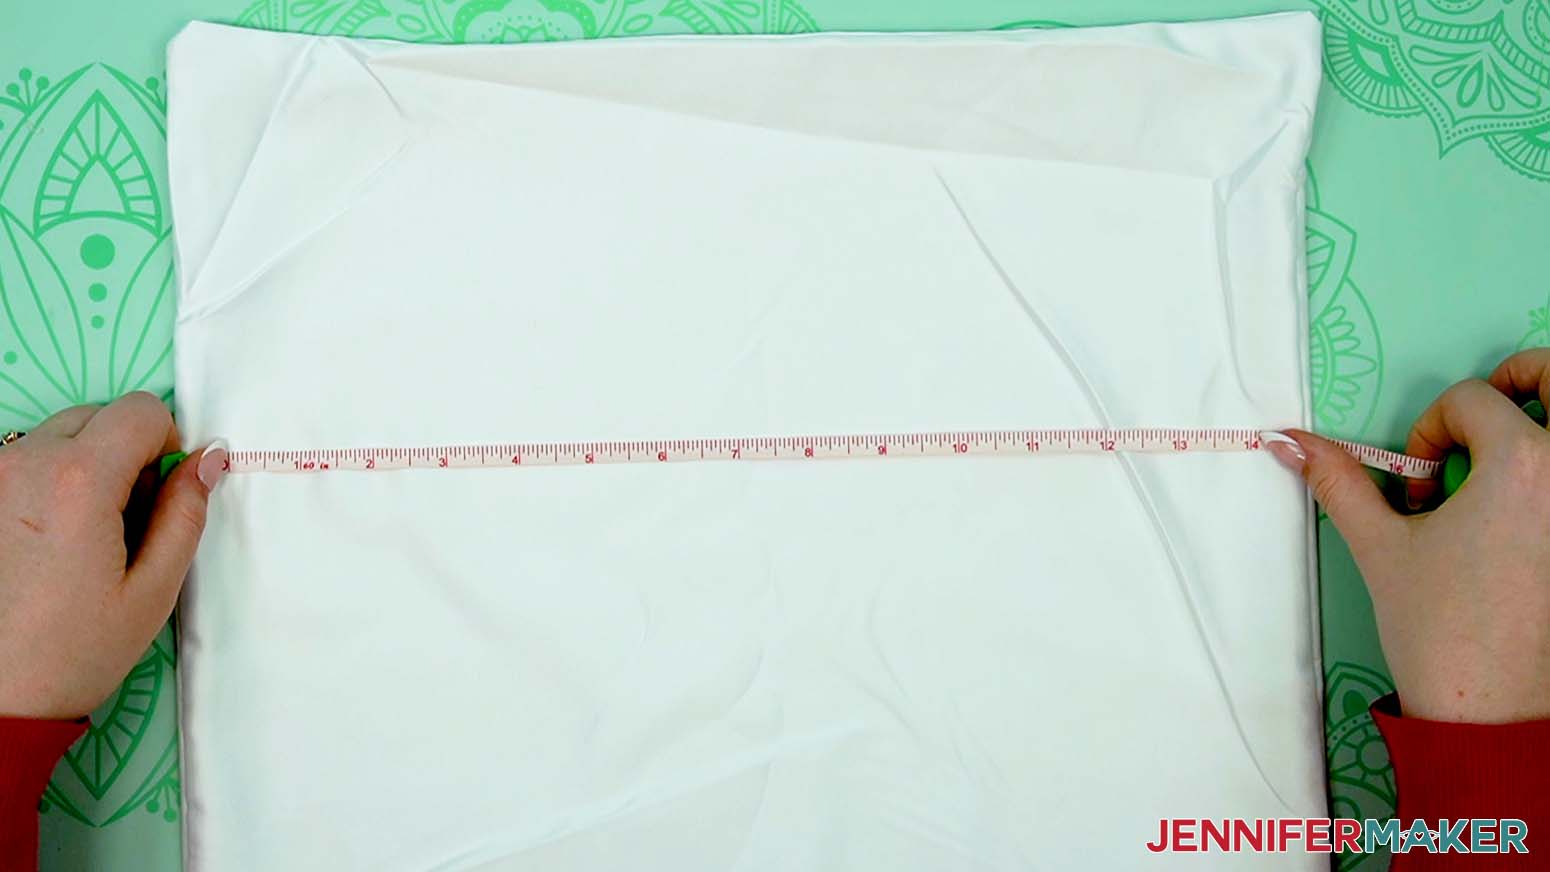 Use a tape measure to verify the size of the blank sublimation pillow case.